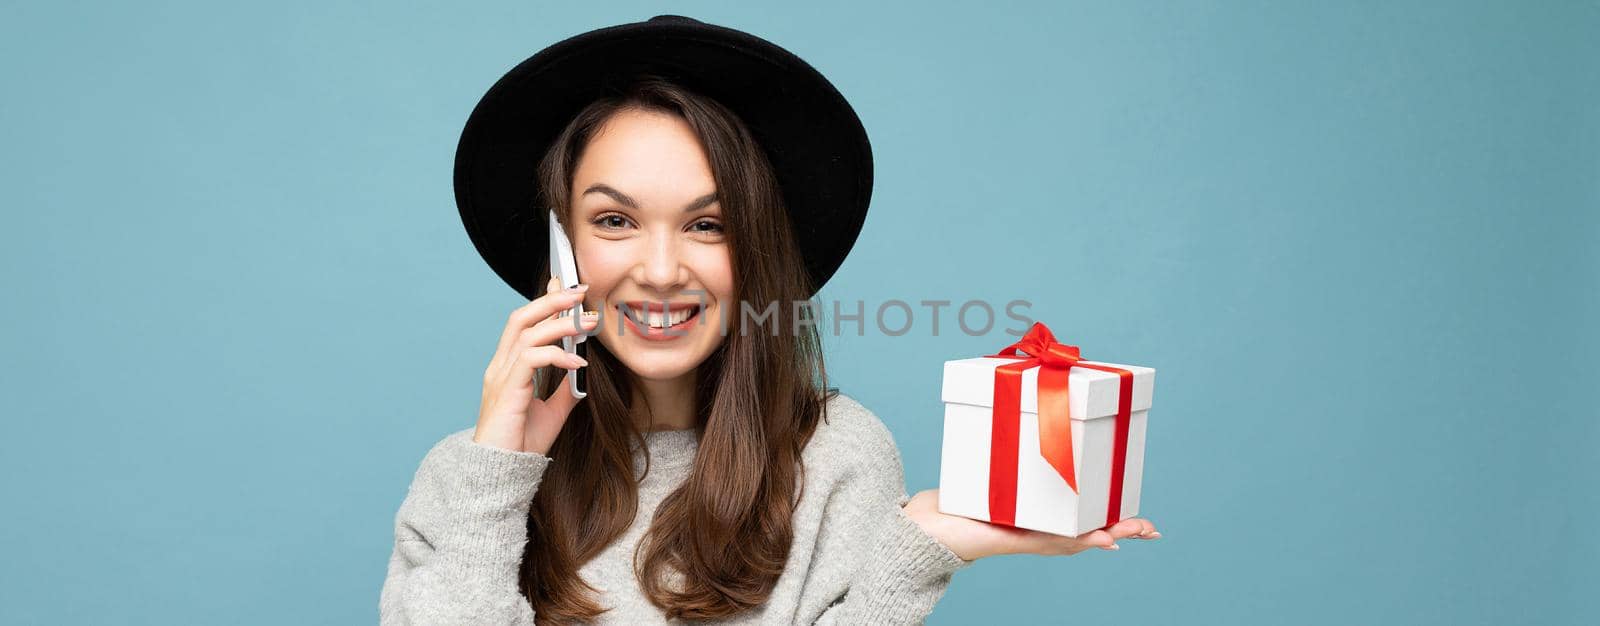 Shot of pretty smiling positive young brunette woman isolated over blue background wall wearing stylish black hat and grey sweater holding gift box talking on smartphone and looking at camera by TRMK